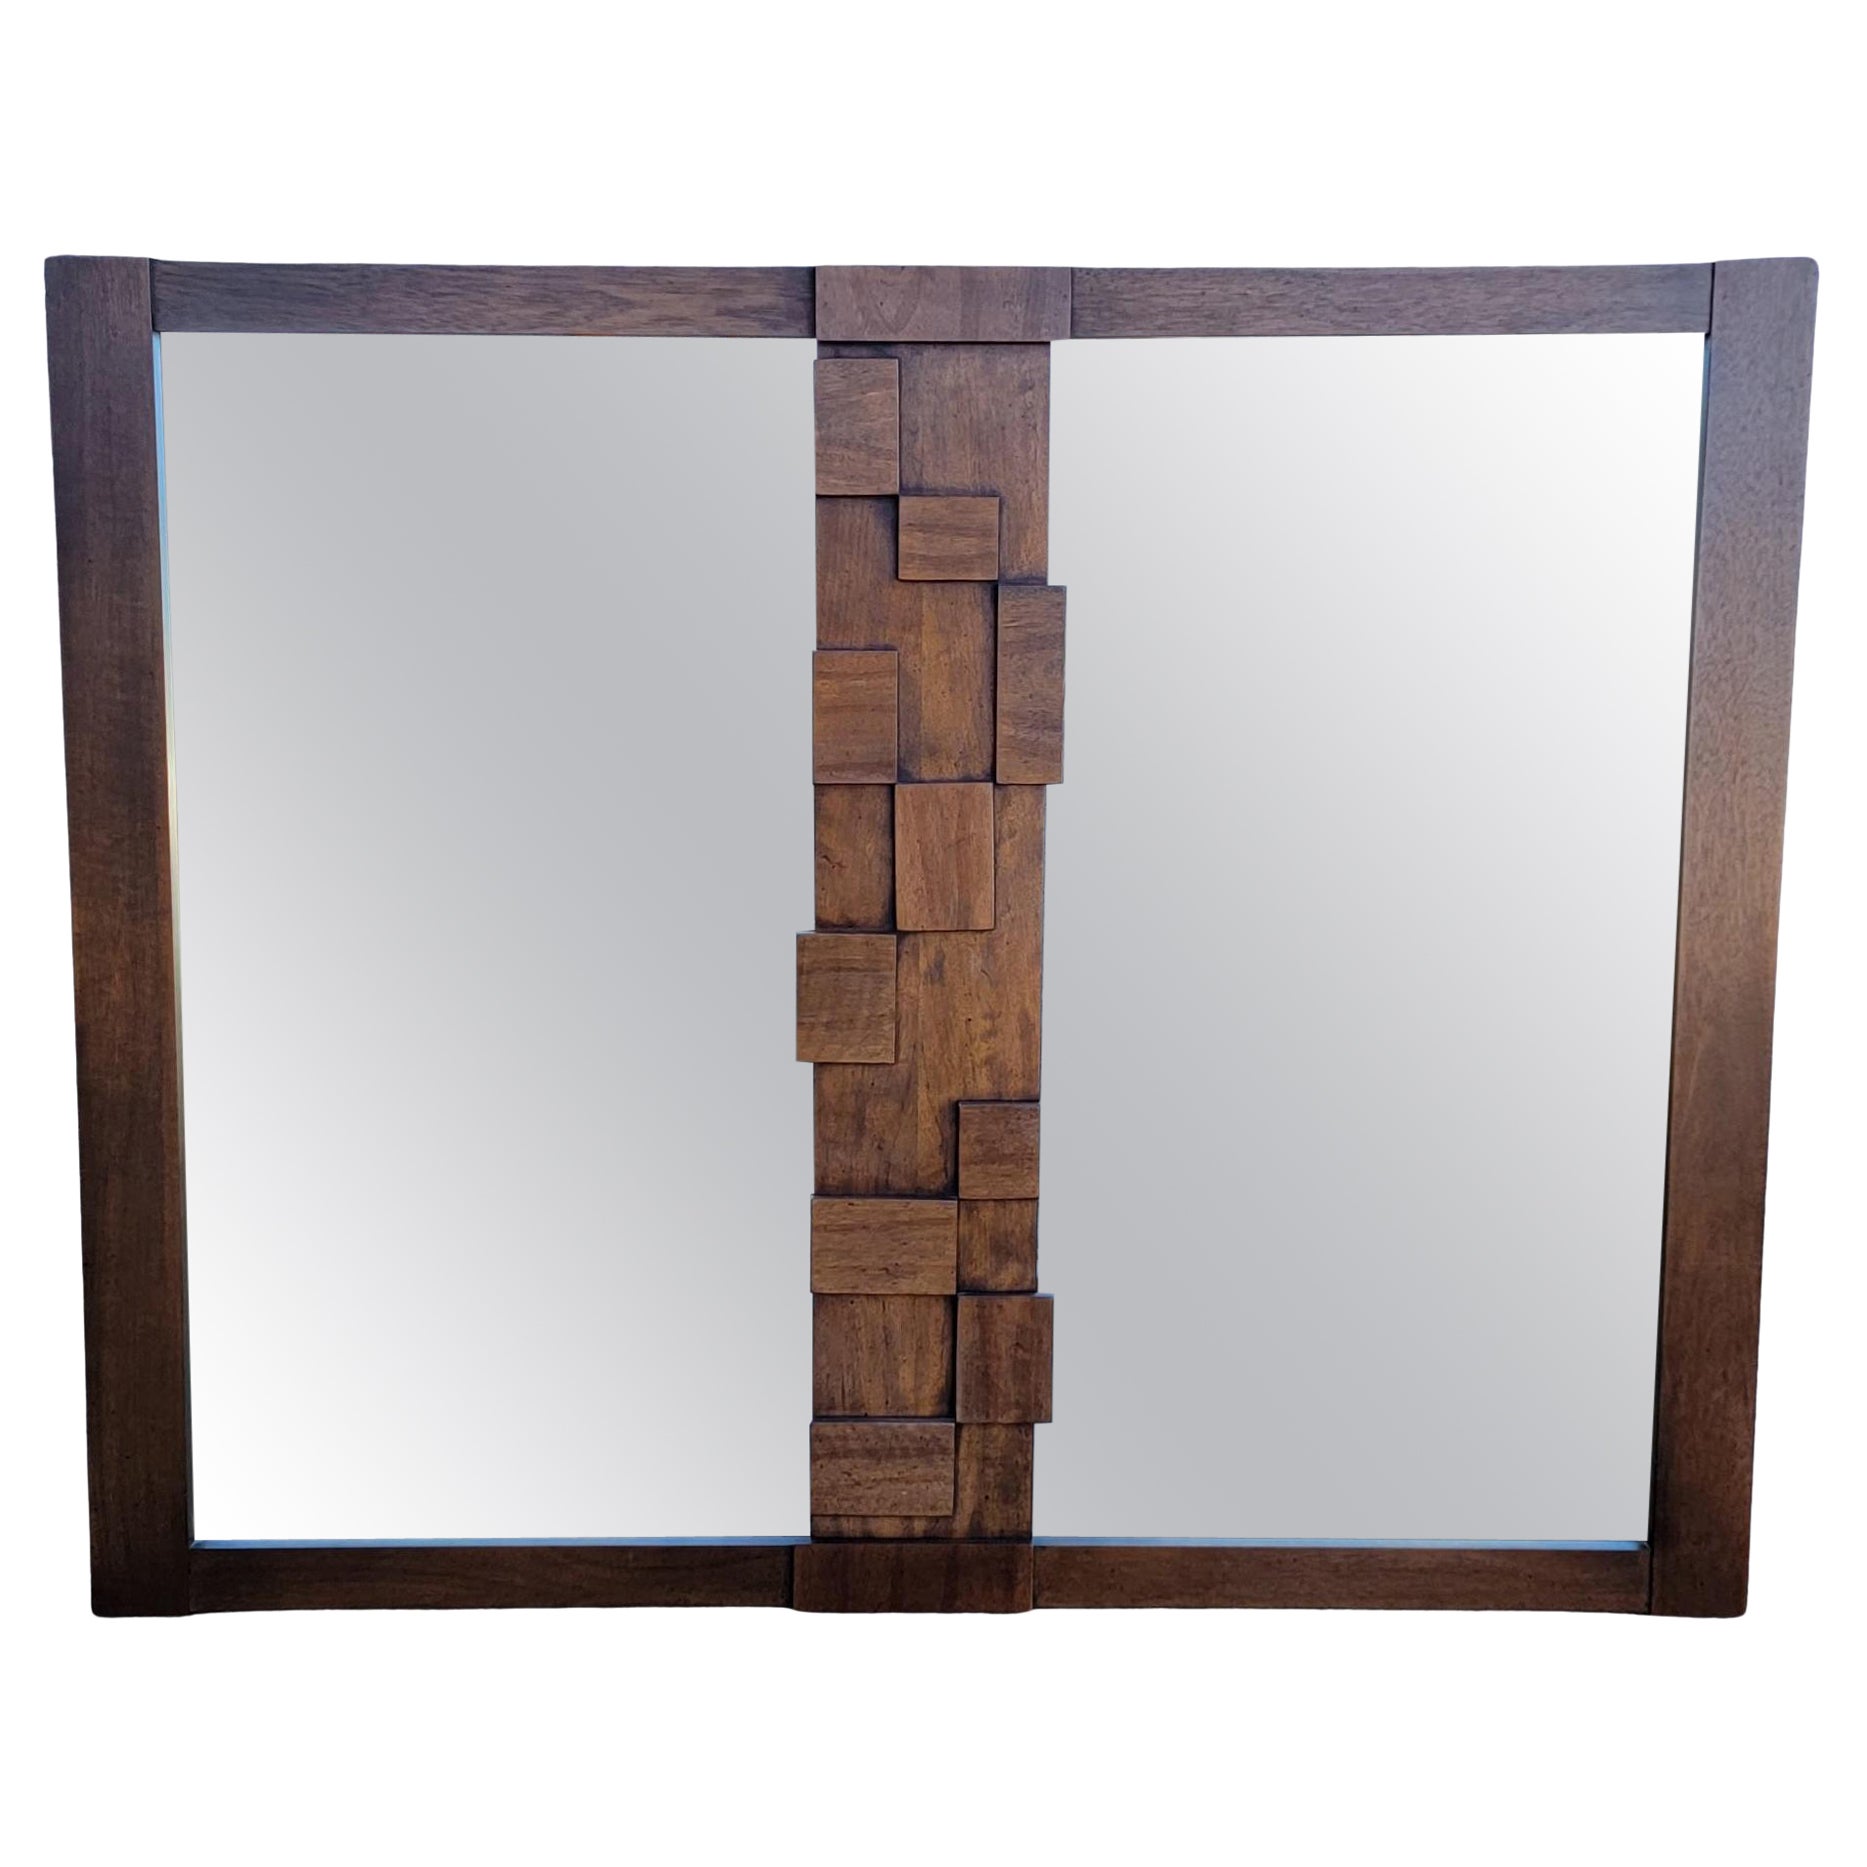 Brutalist Mirror by Lane Furniture "Staccato" Line 1970's For Sale